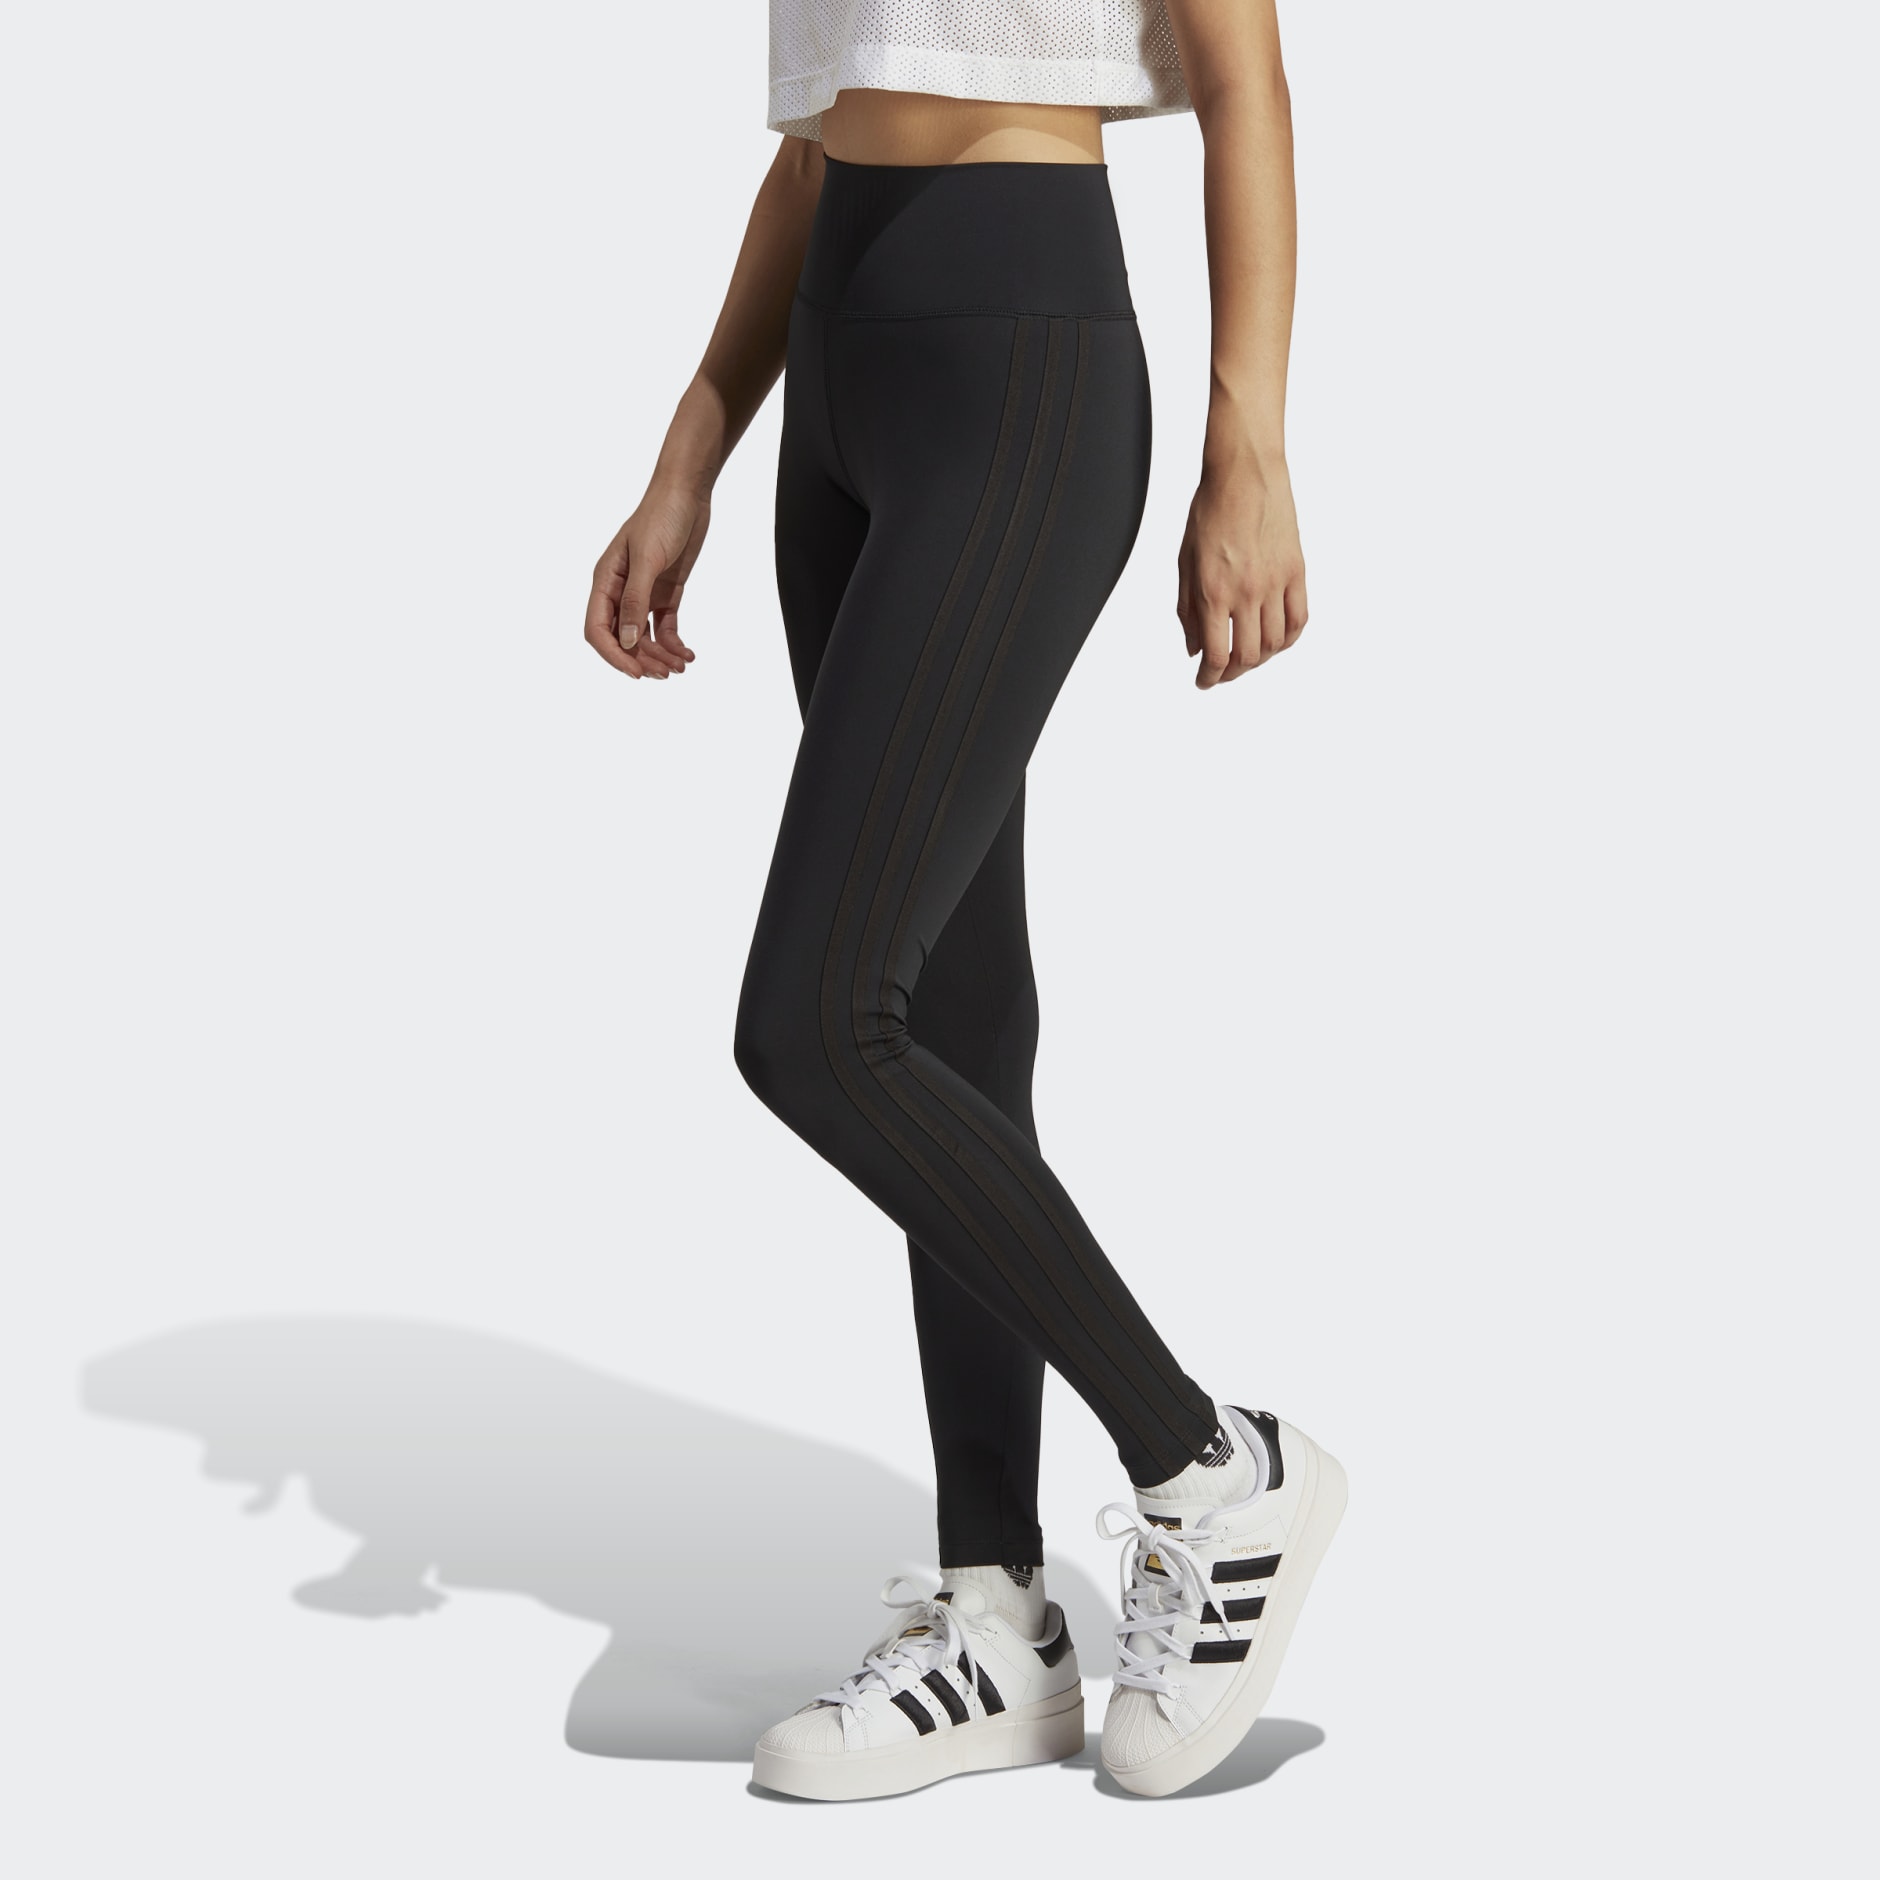 Adidas Tights - Shop for Adidas Tight Online in India | Myntra